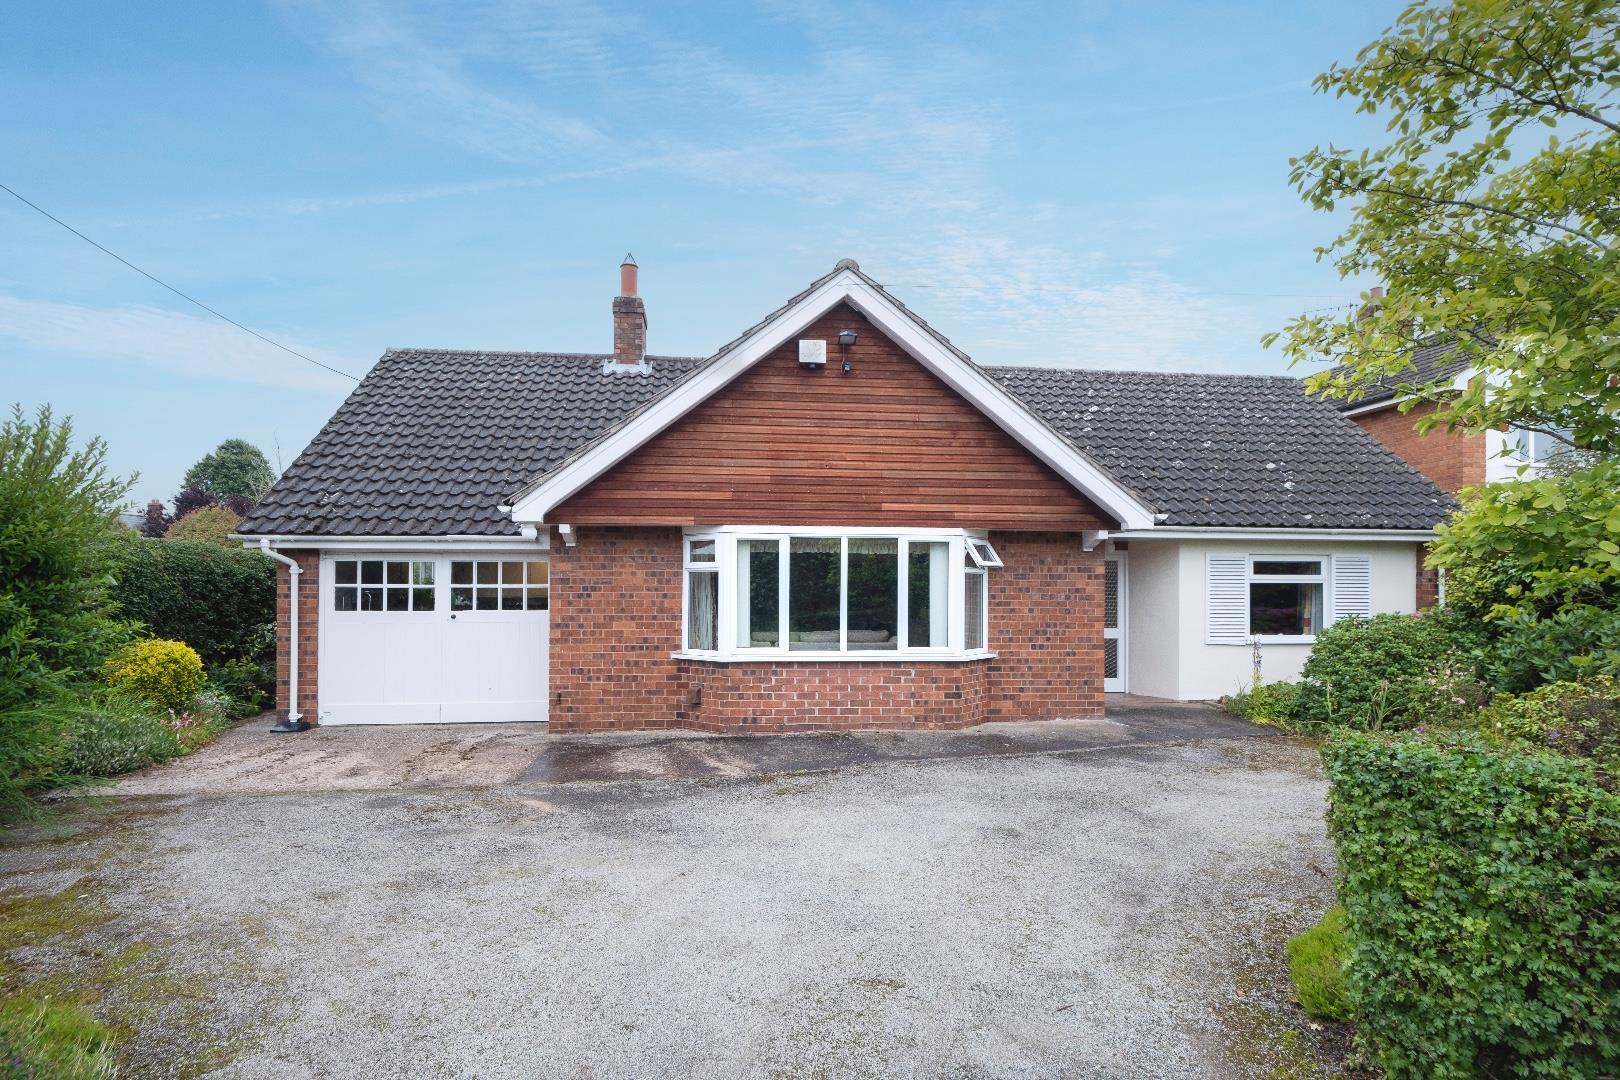 3 bedroom  Detached Bungalow for Sale in Spurstow